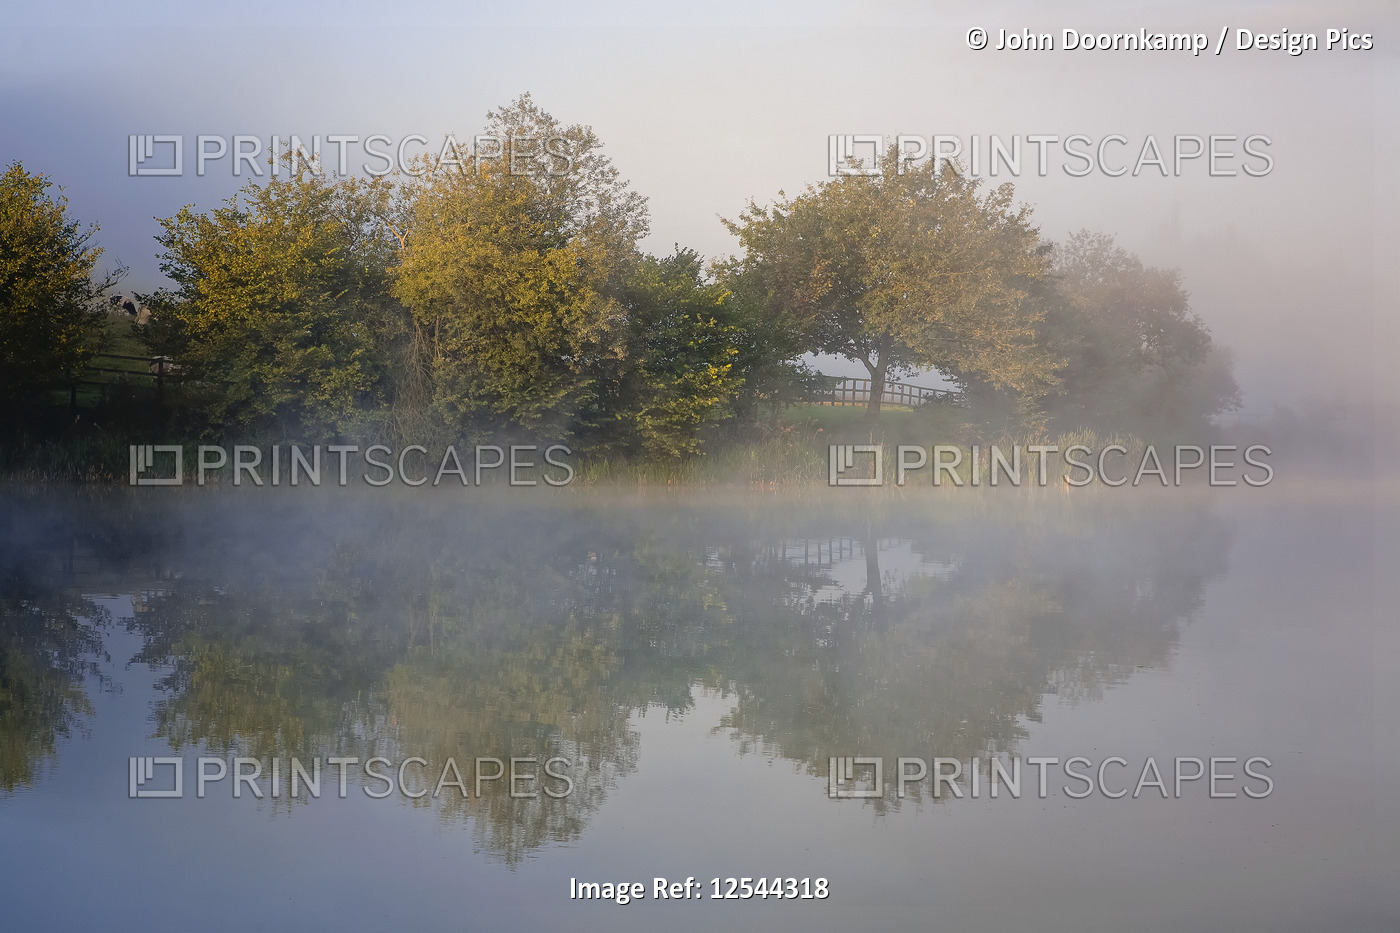 EARLY MORNING MISTS AND REFLECTIONS OVER THE CALM WATERS OF A LAKE, BELGIUM